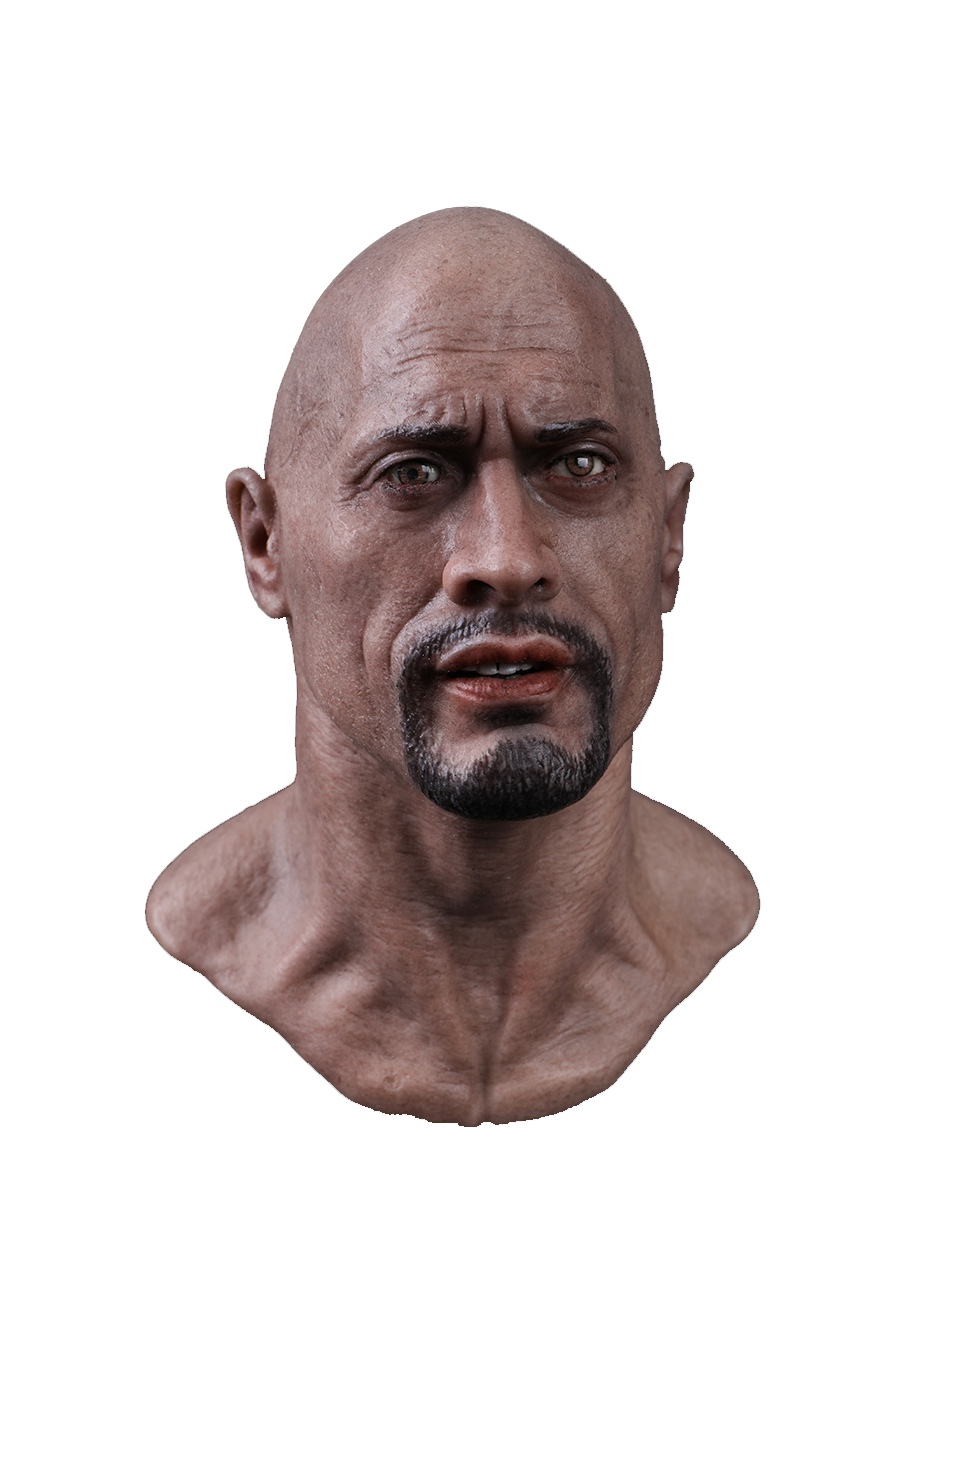 Coomodel - NEW PRODUCT: COOMODEL & CHENTOYS: 1/6 full silicone figurative head carving #SG001 20070910